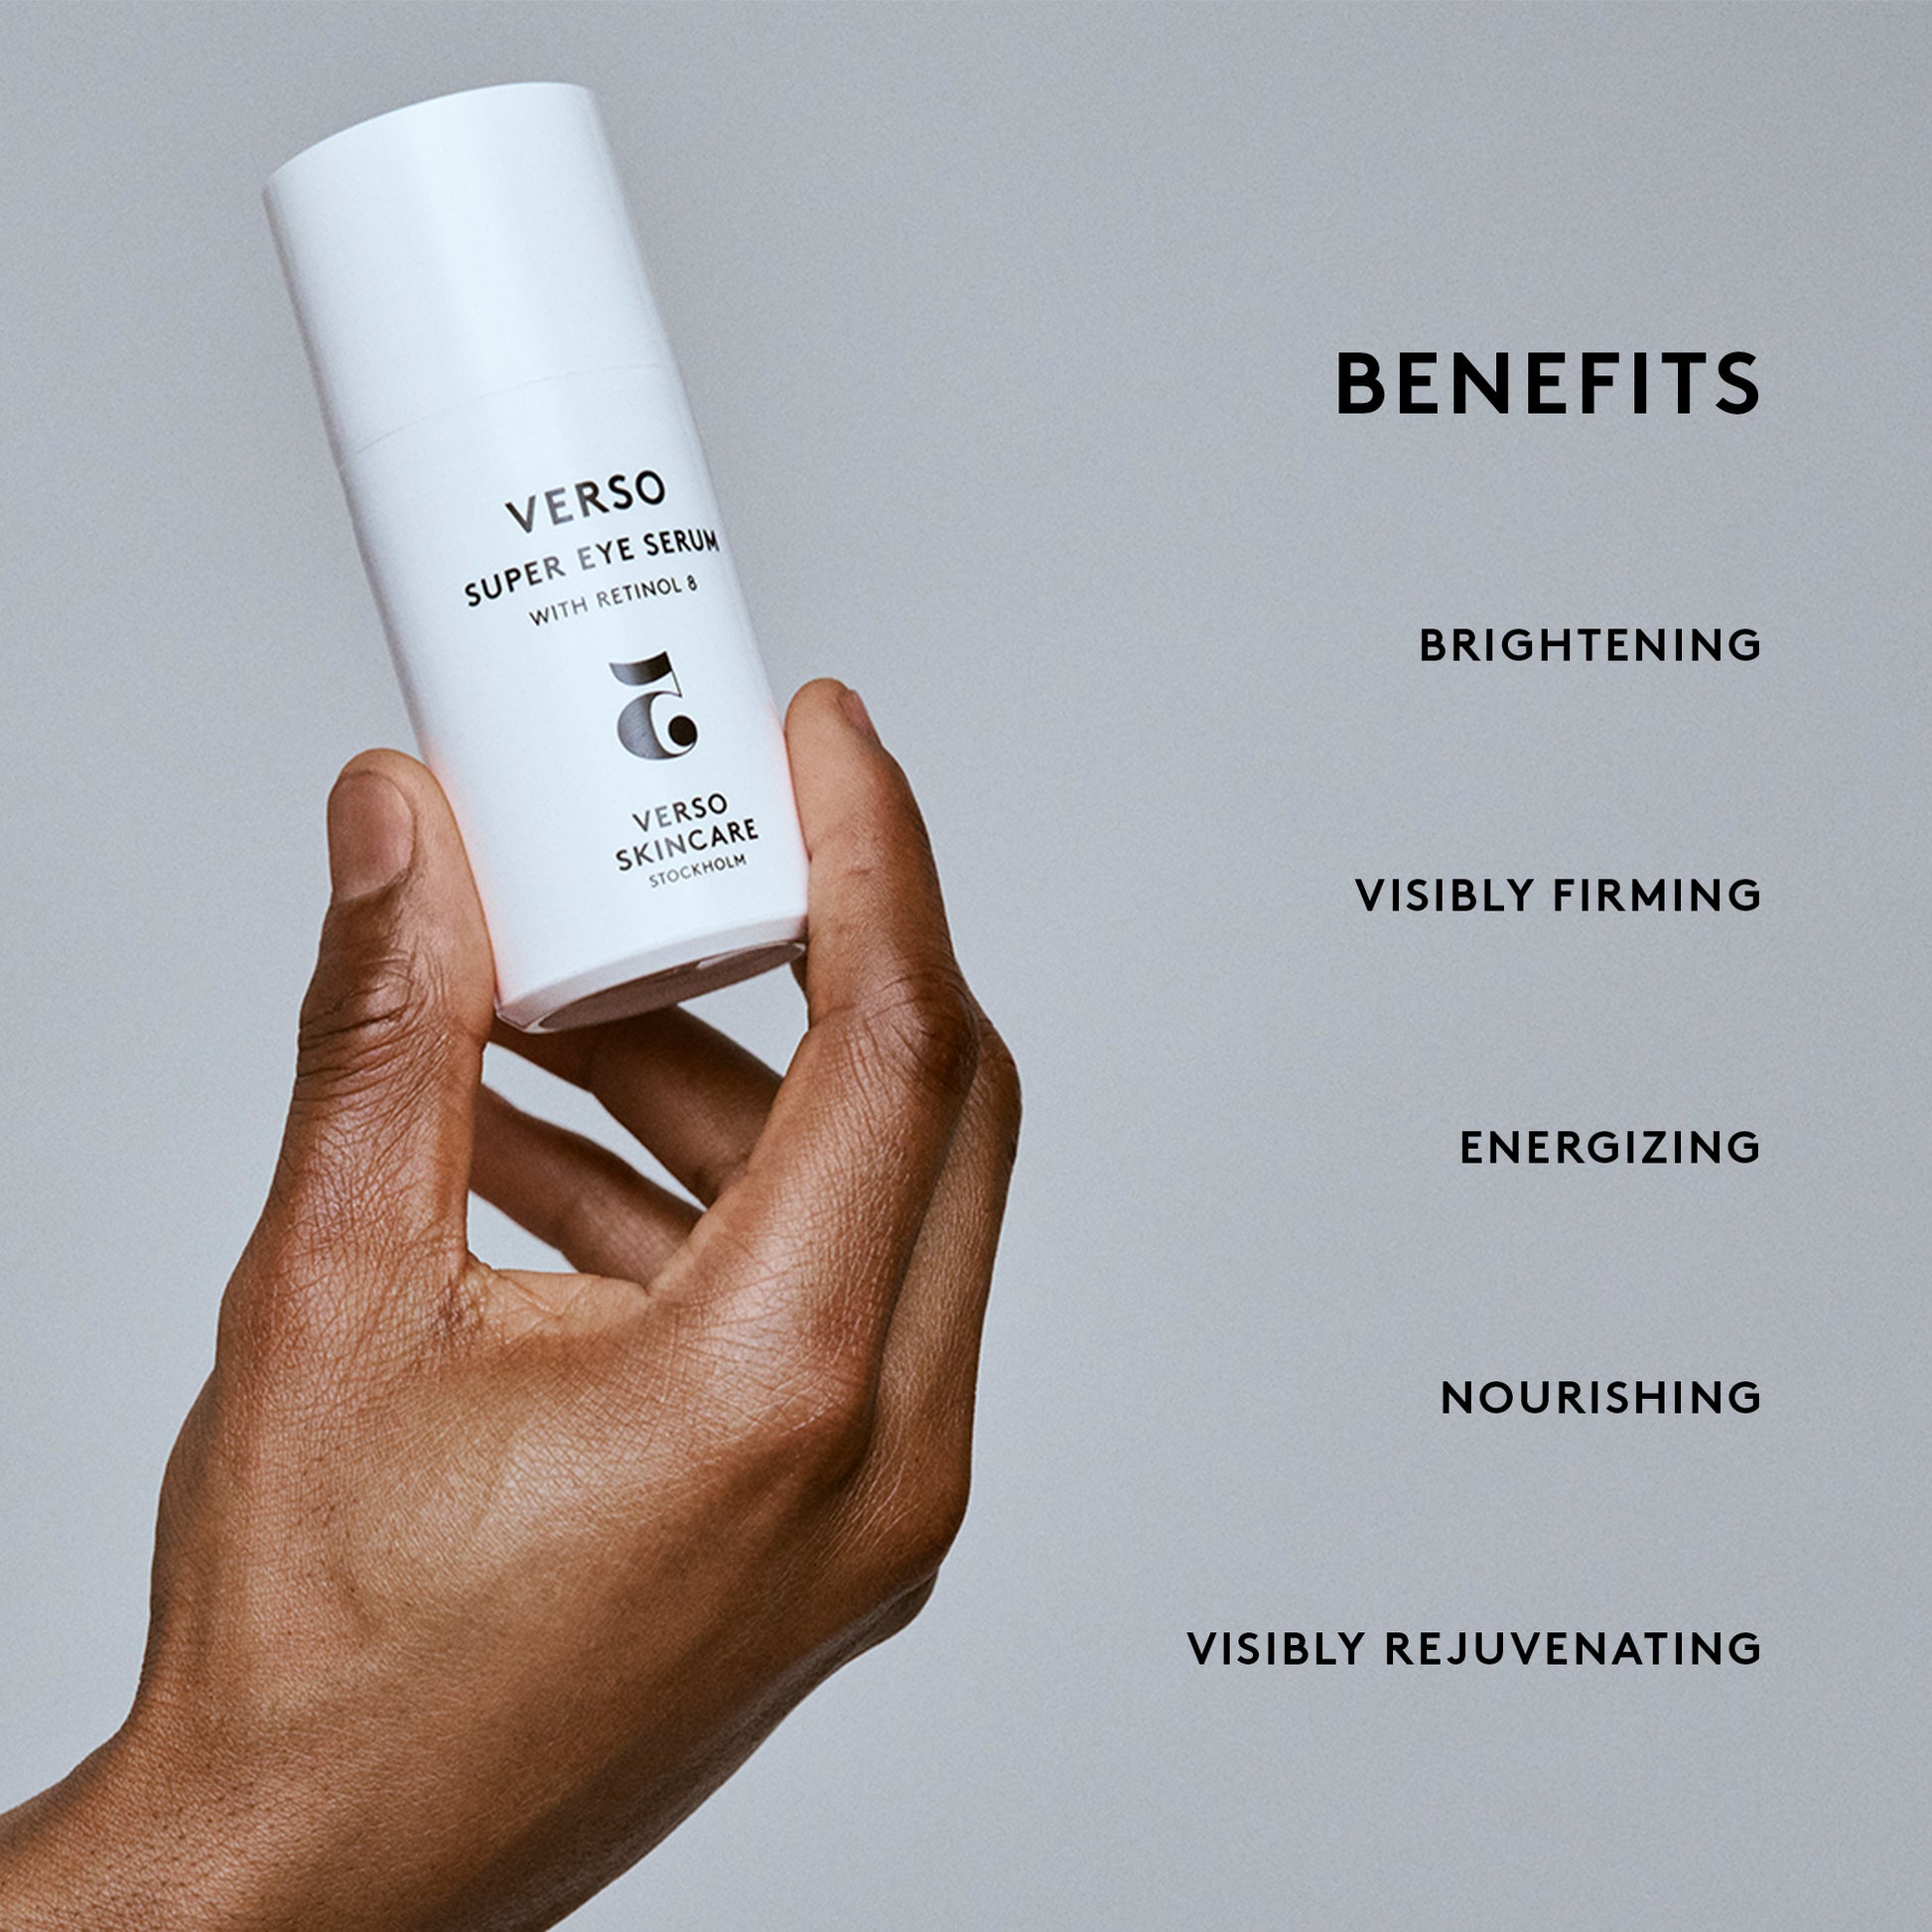 Verso Super Eye Serum: Verso Super Eye Serum is a lightweight eye serum targeting the signs of aging while energizing tired skin around the eyes. Formulated with Retinol 8 for increased affectivity. The results may include a reduced appearance of puffiness, dark circles, and hyperpigmentation.